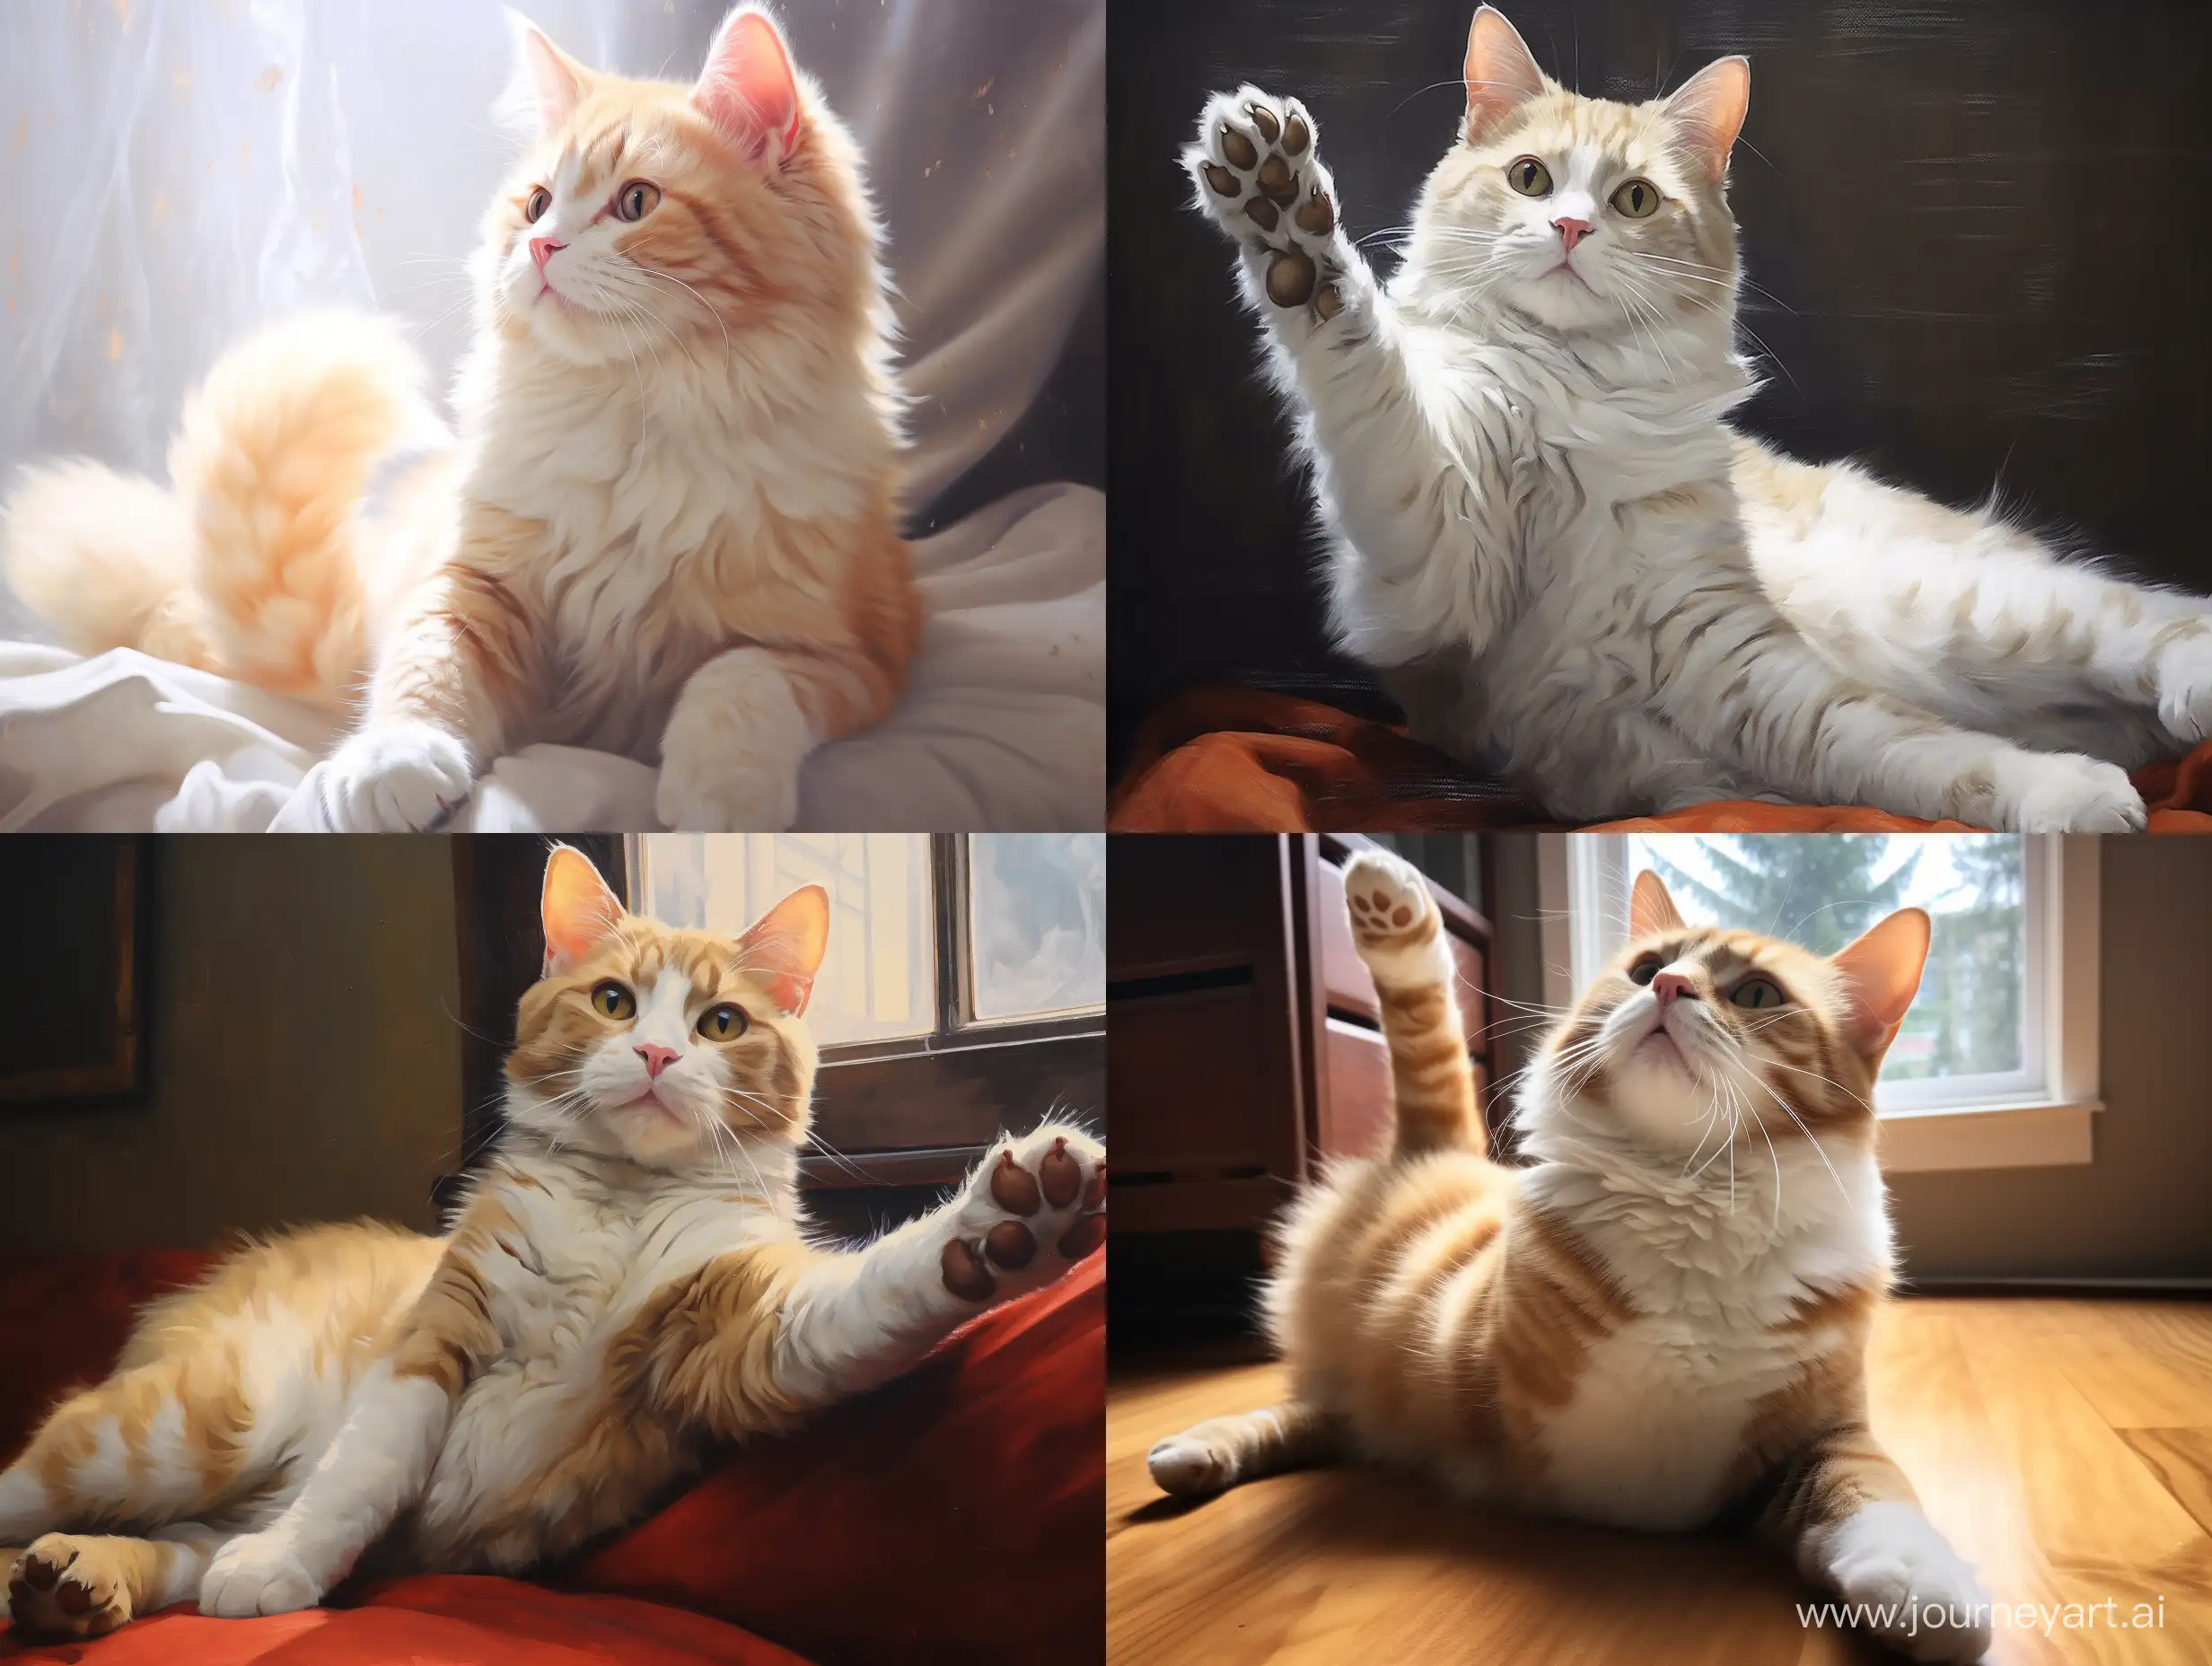 Maxwell cat Stretching out a paw